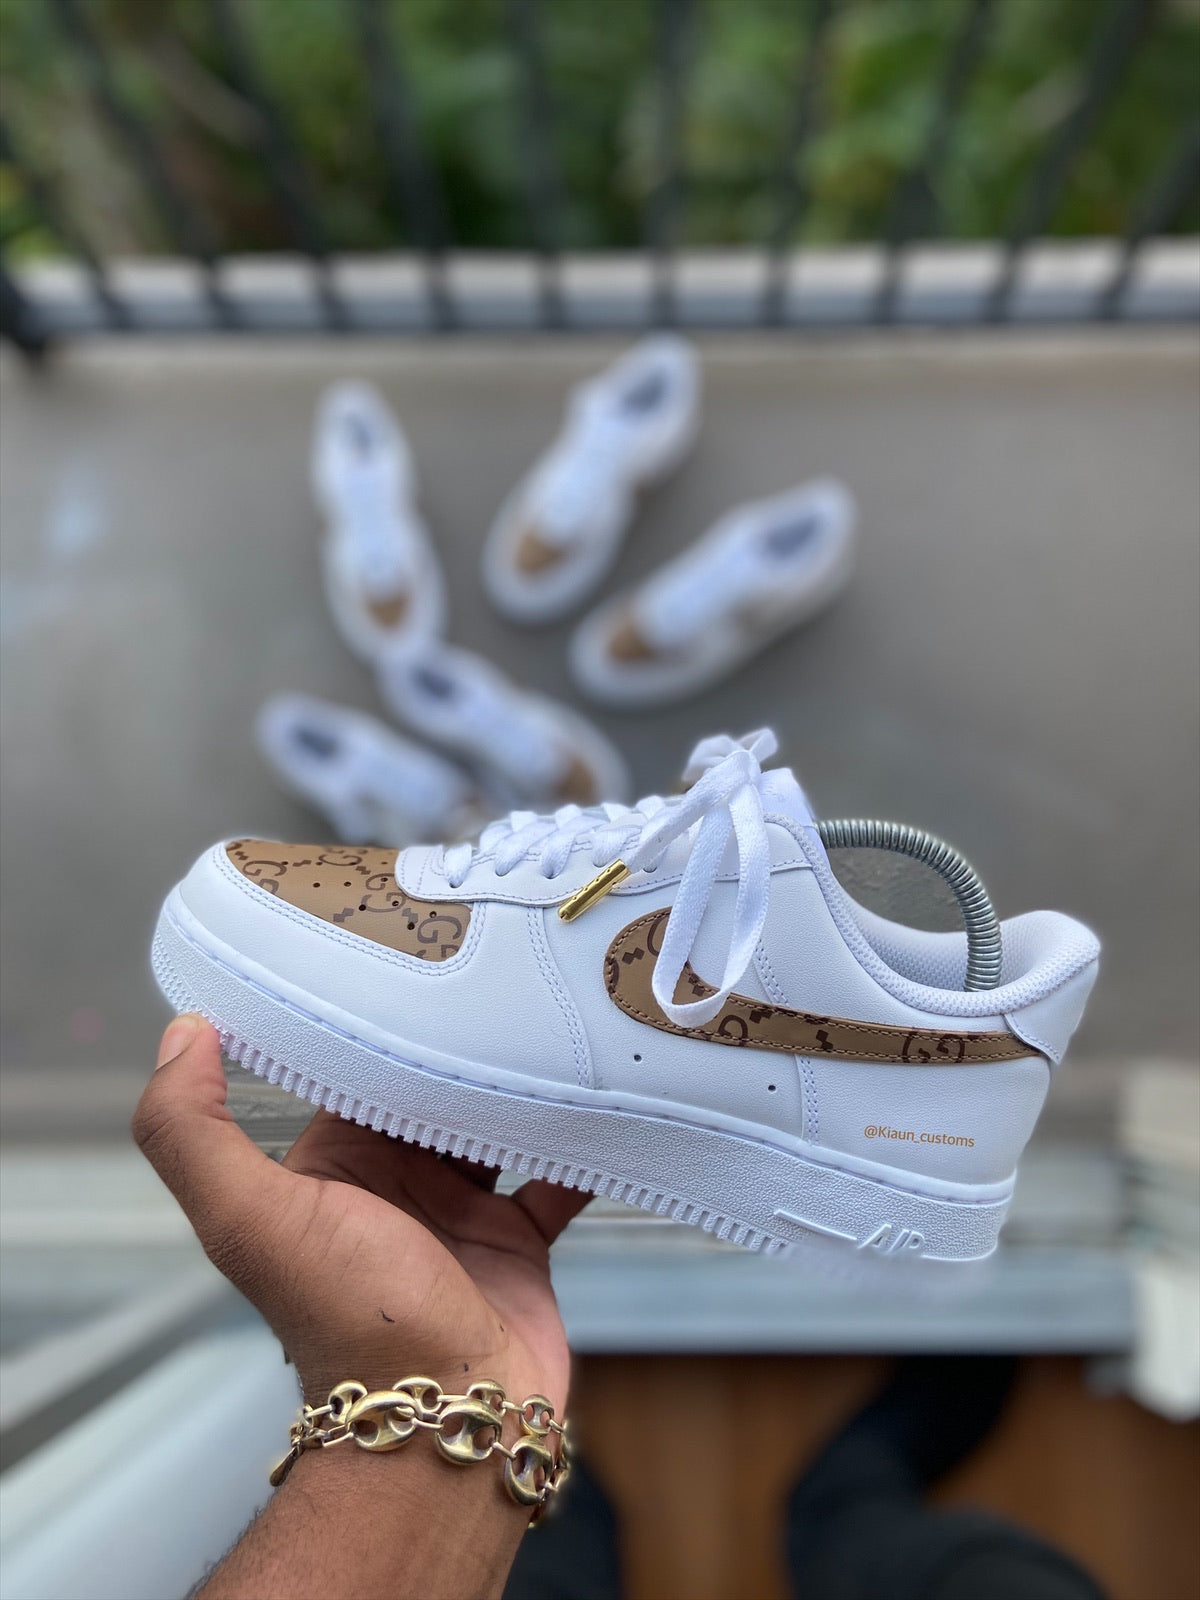 gucci air force 1s